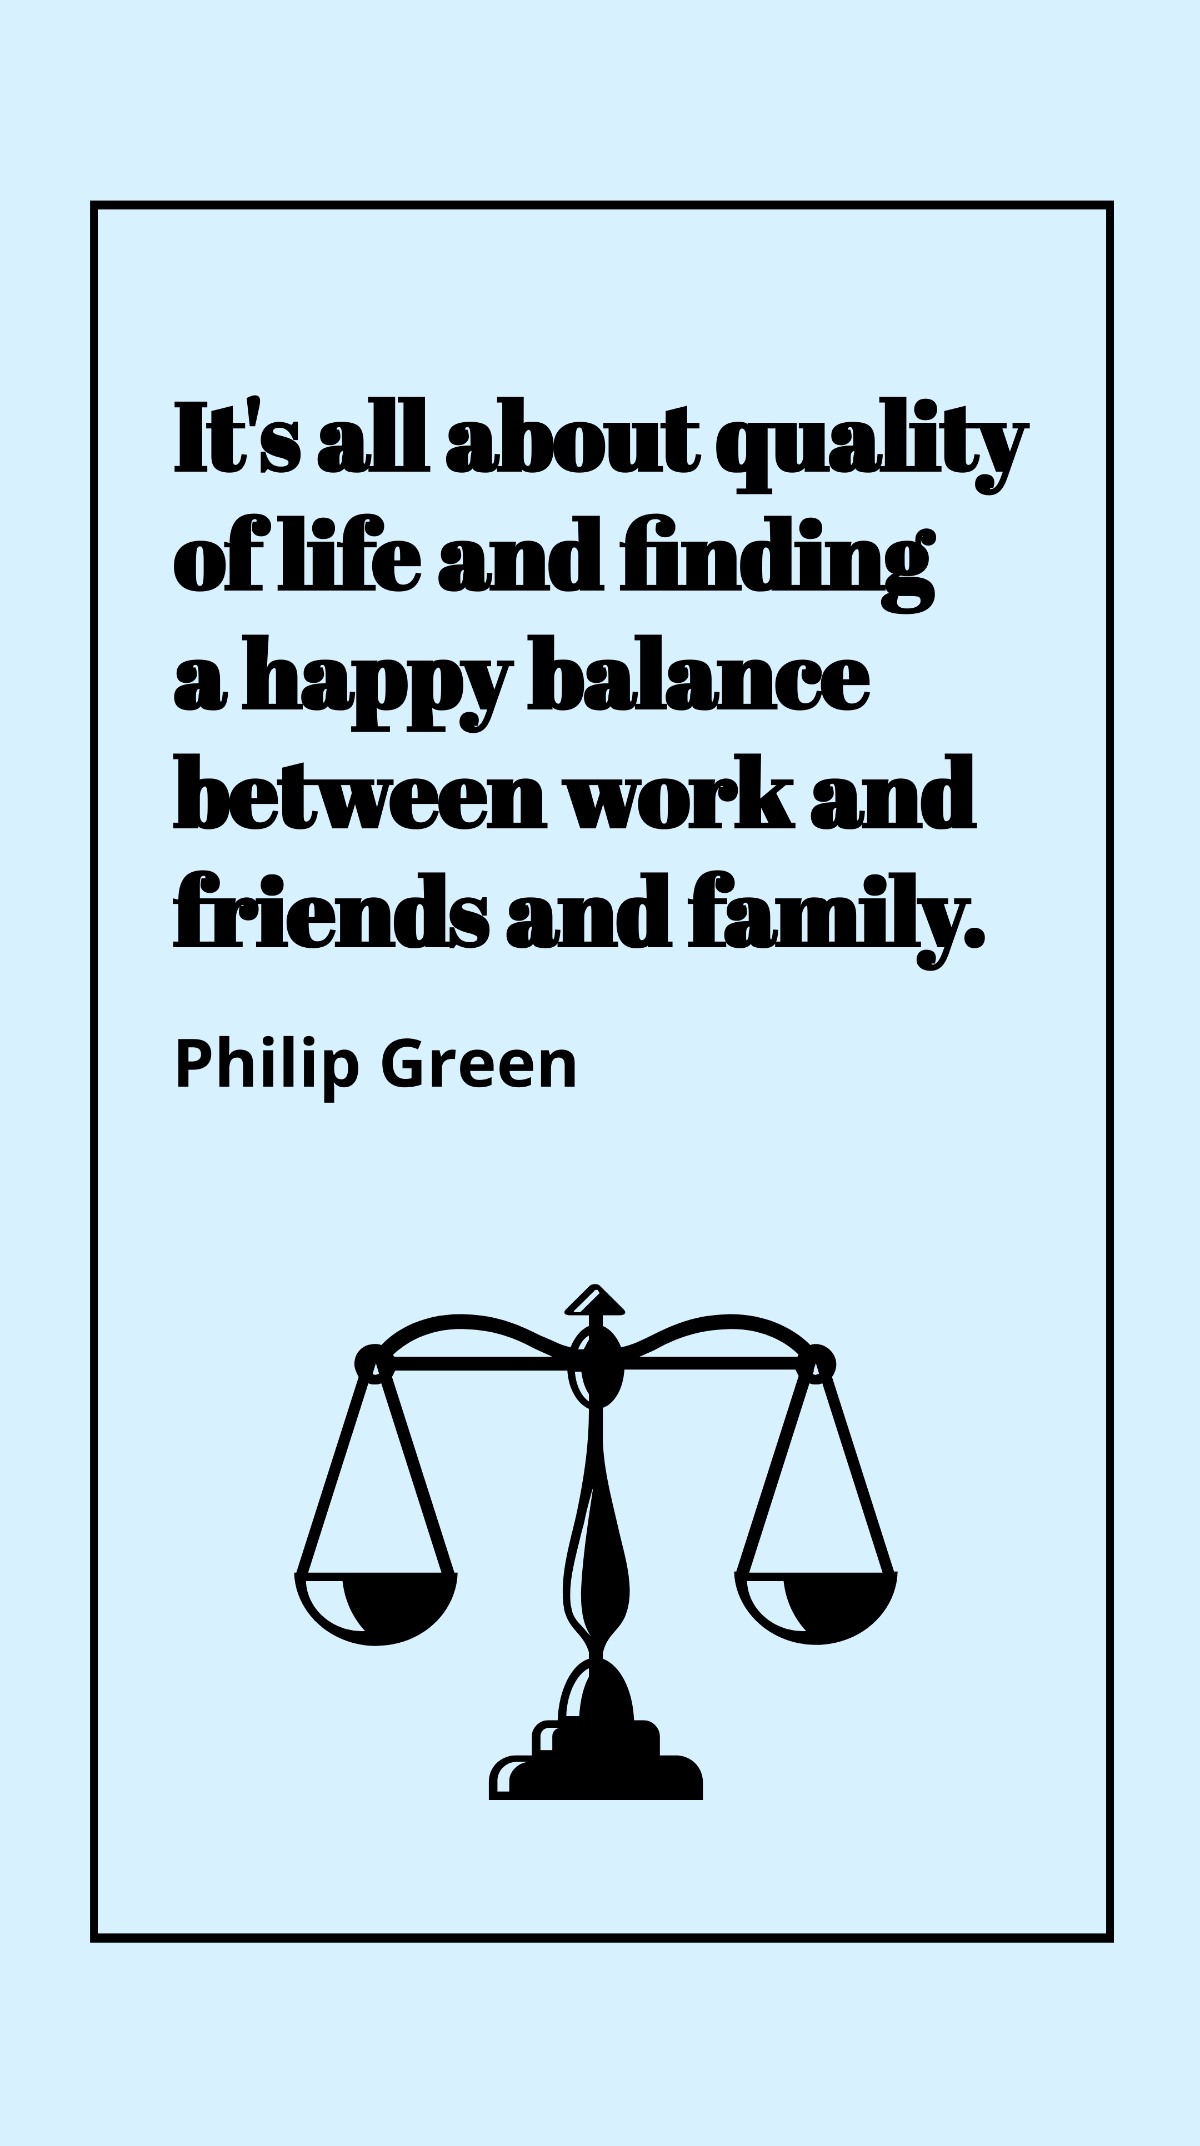 Philip Green - It's all about quality of life and finding a happy balance between work and friends and family. Template